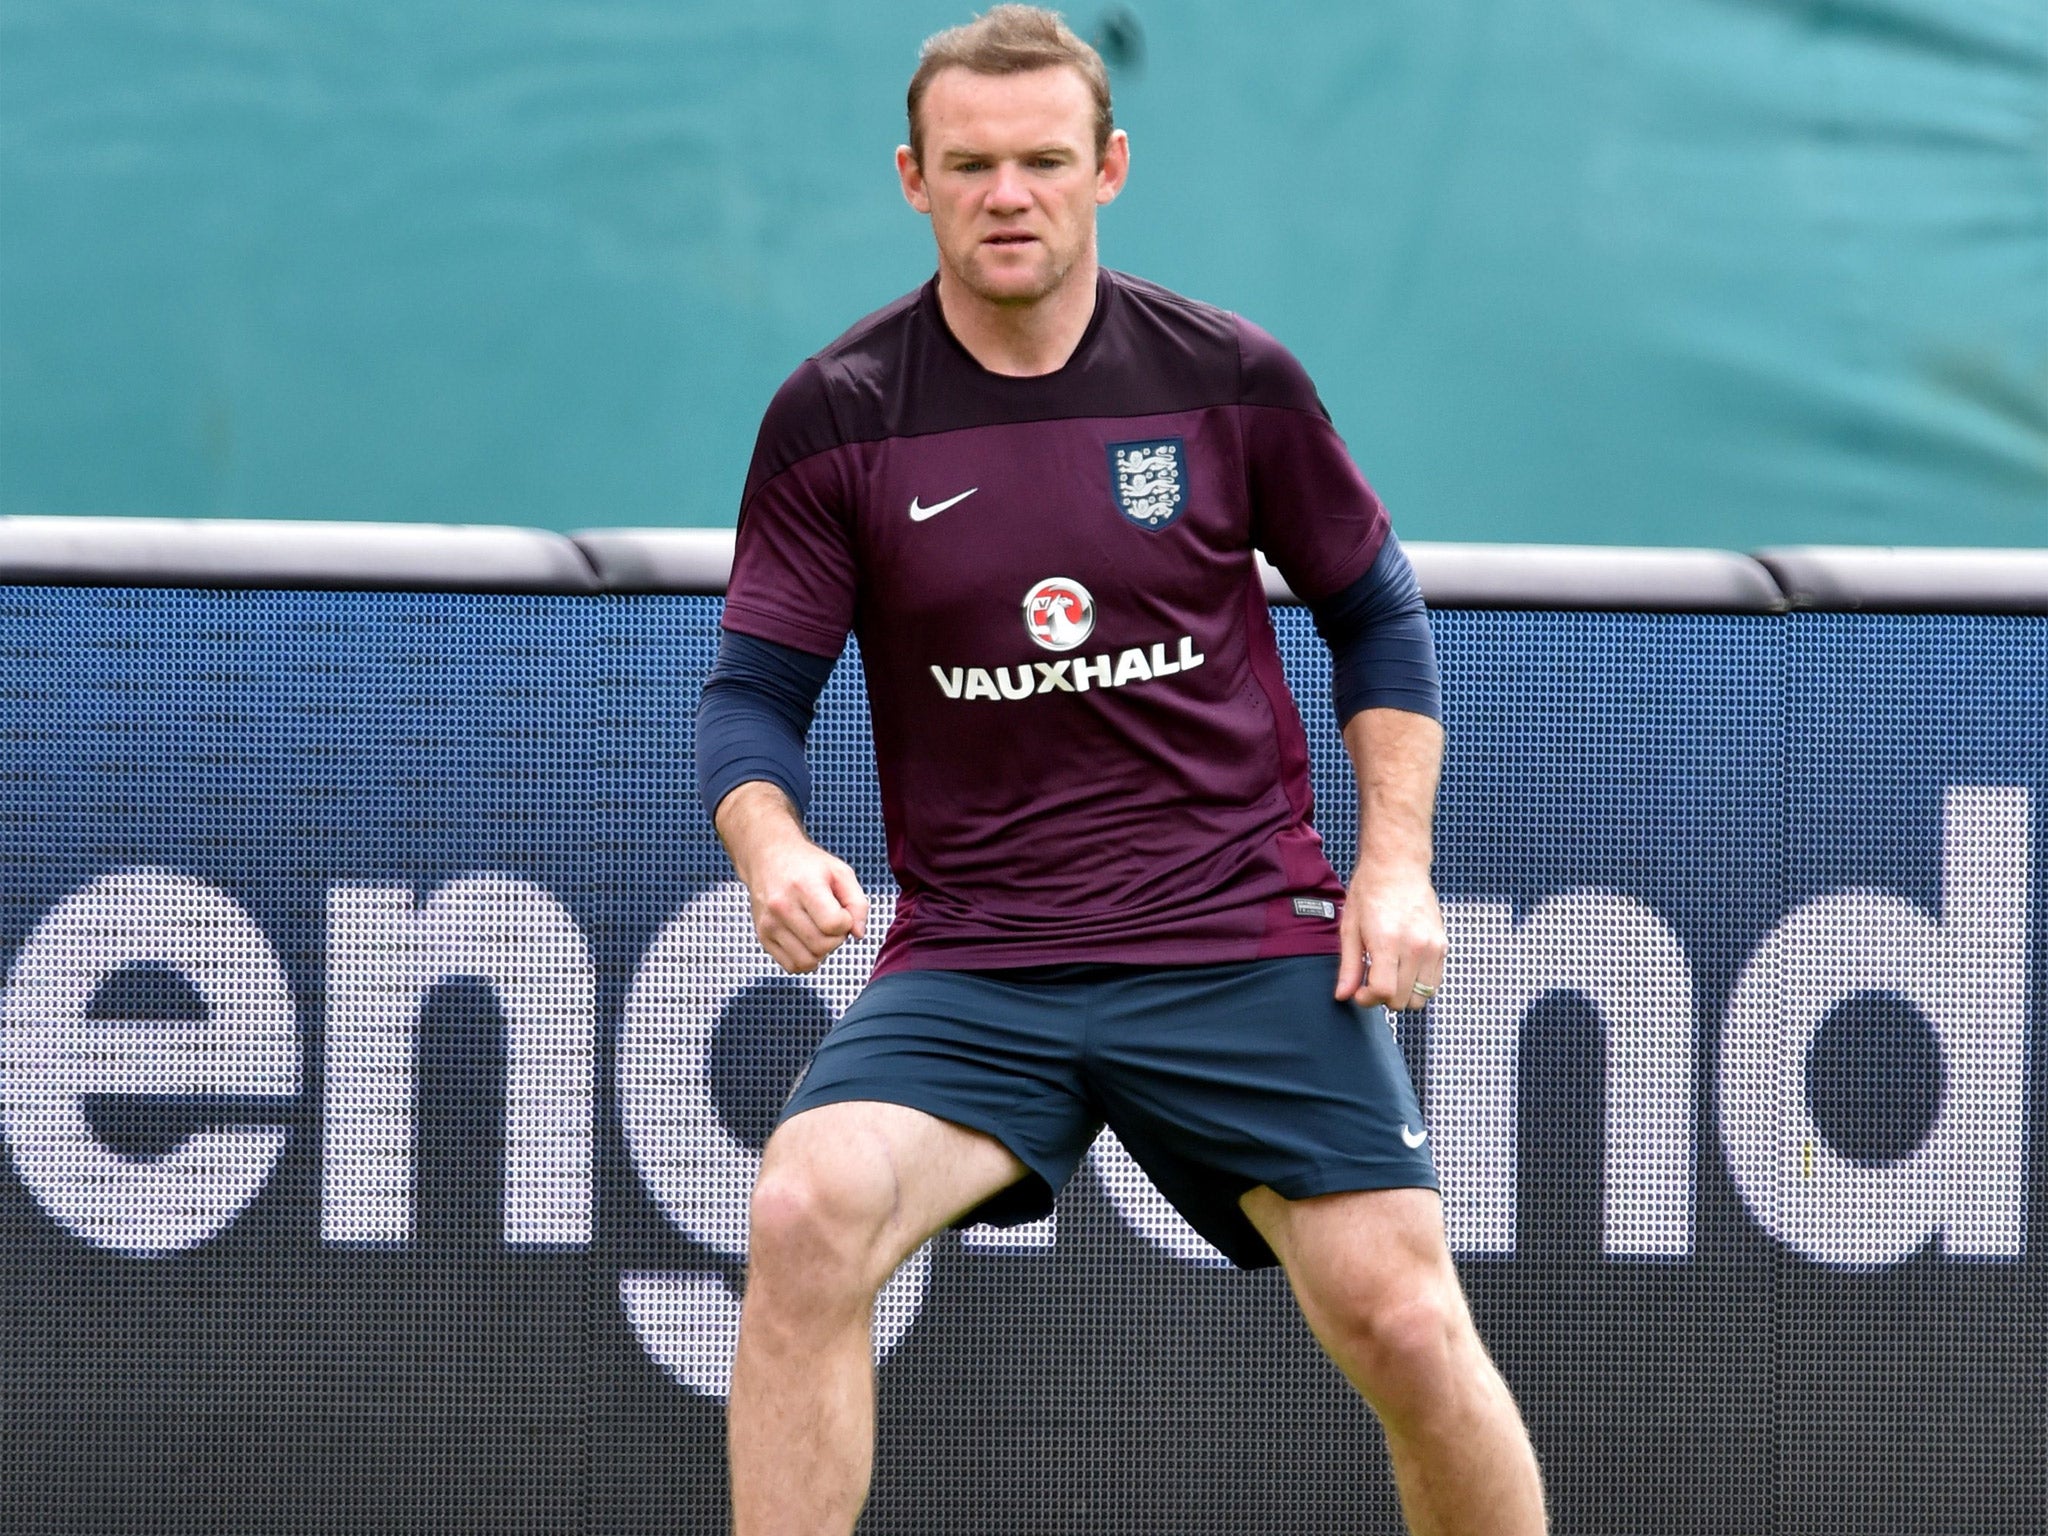 Wayne Rooney trains in Miami as the former England captain Alan Shearer rejected calls to drop the him from the team